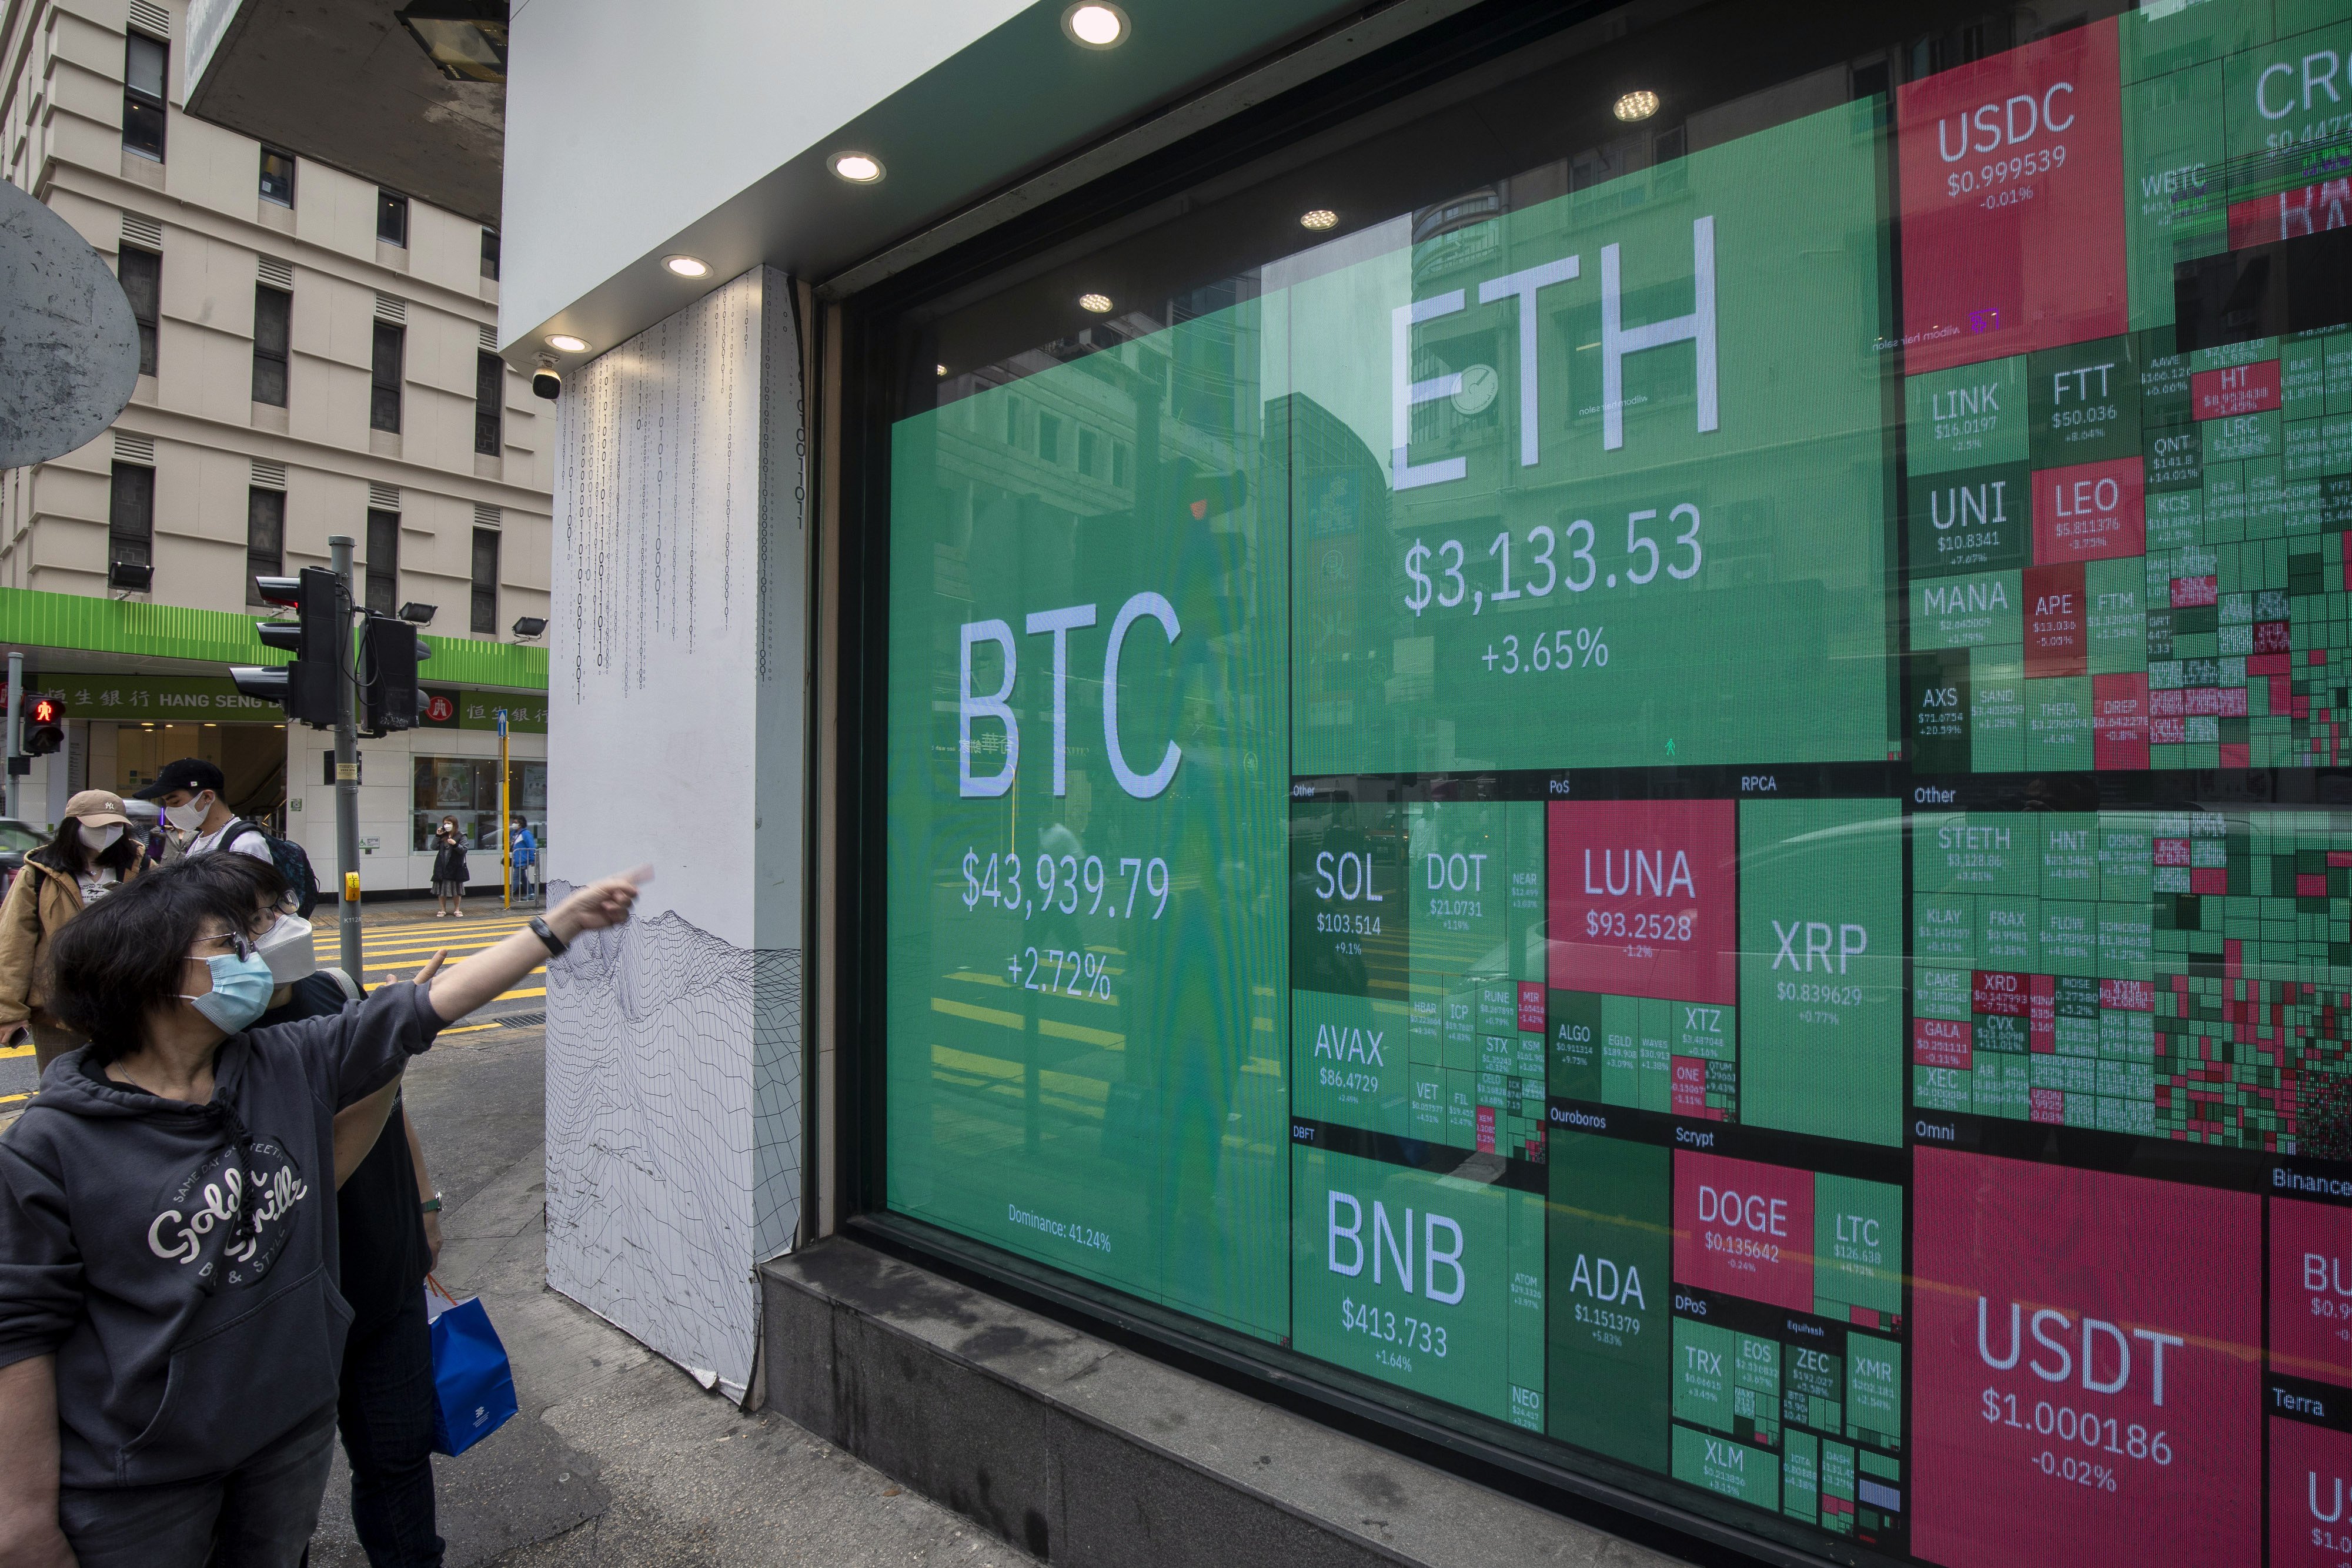 A digital screen displays the prices of cryptocurrencies in Hong Kong on March 25. Photo: Bloomberg